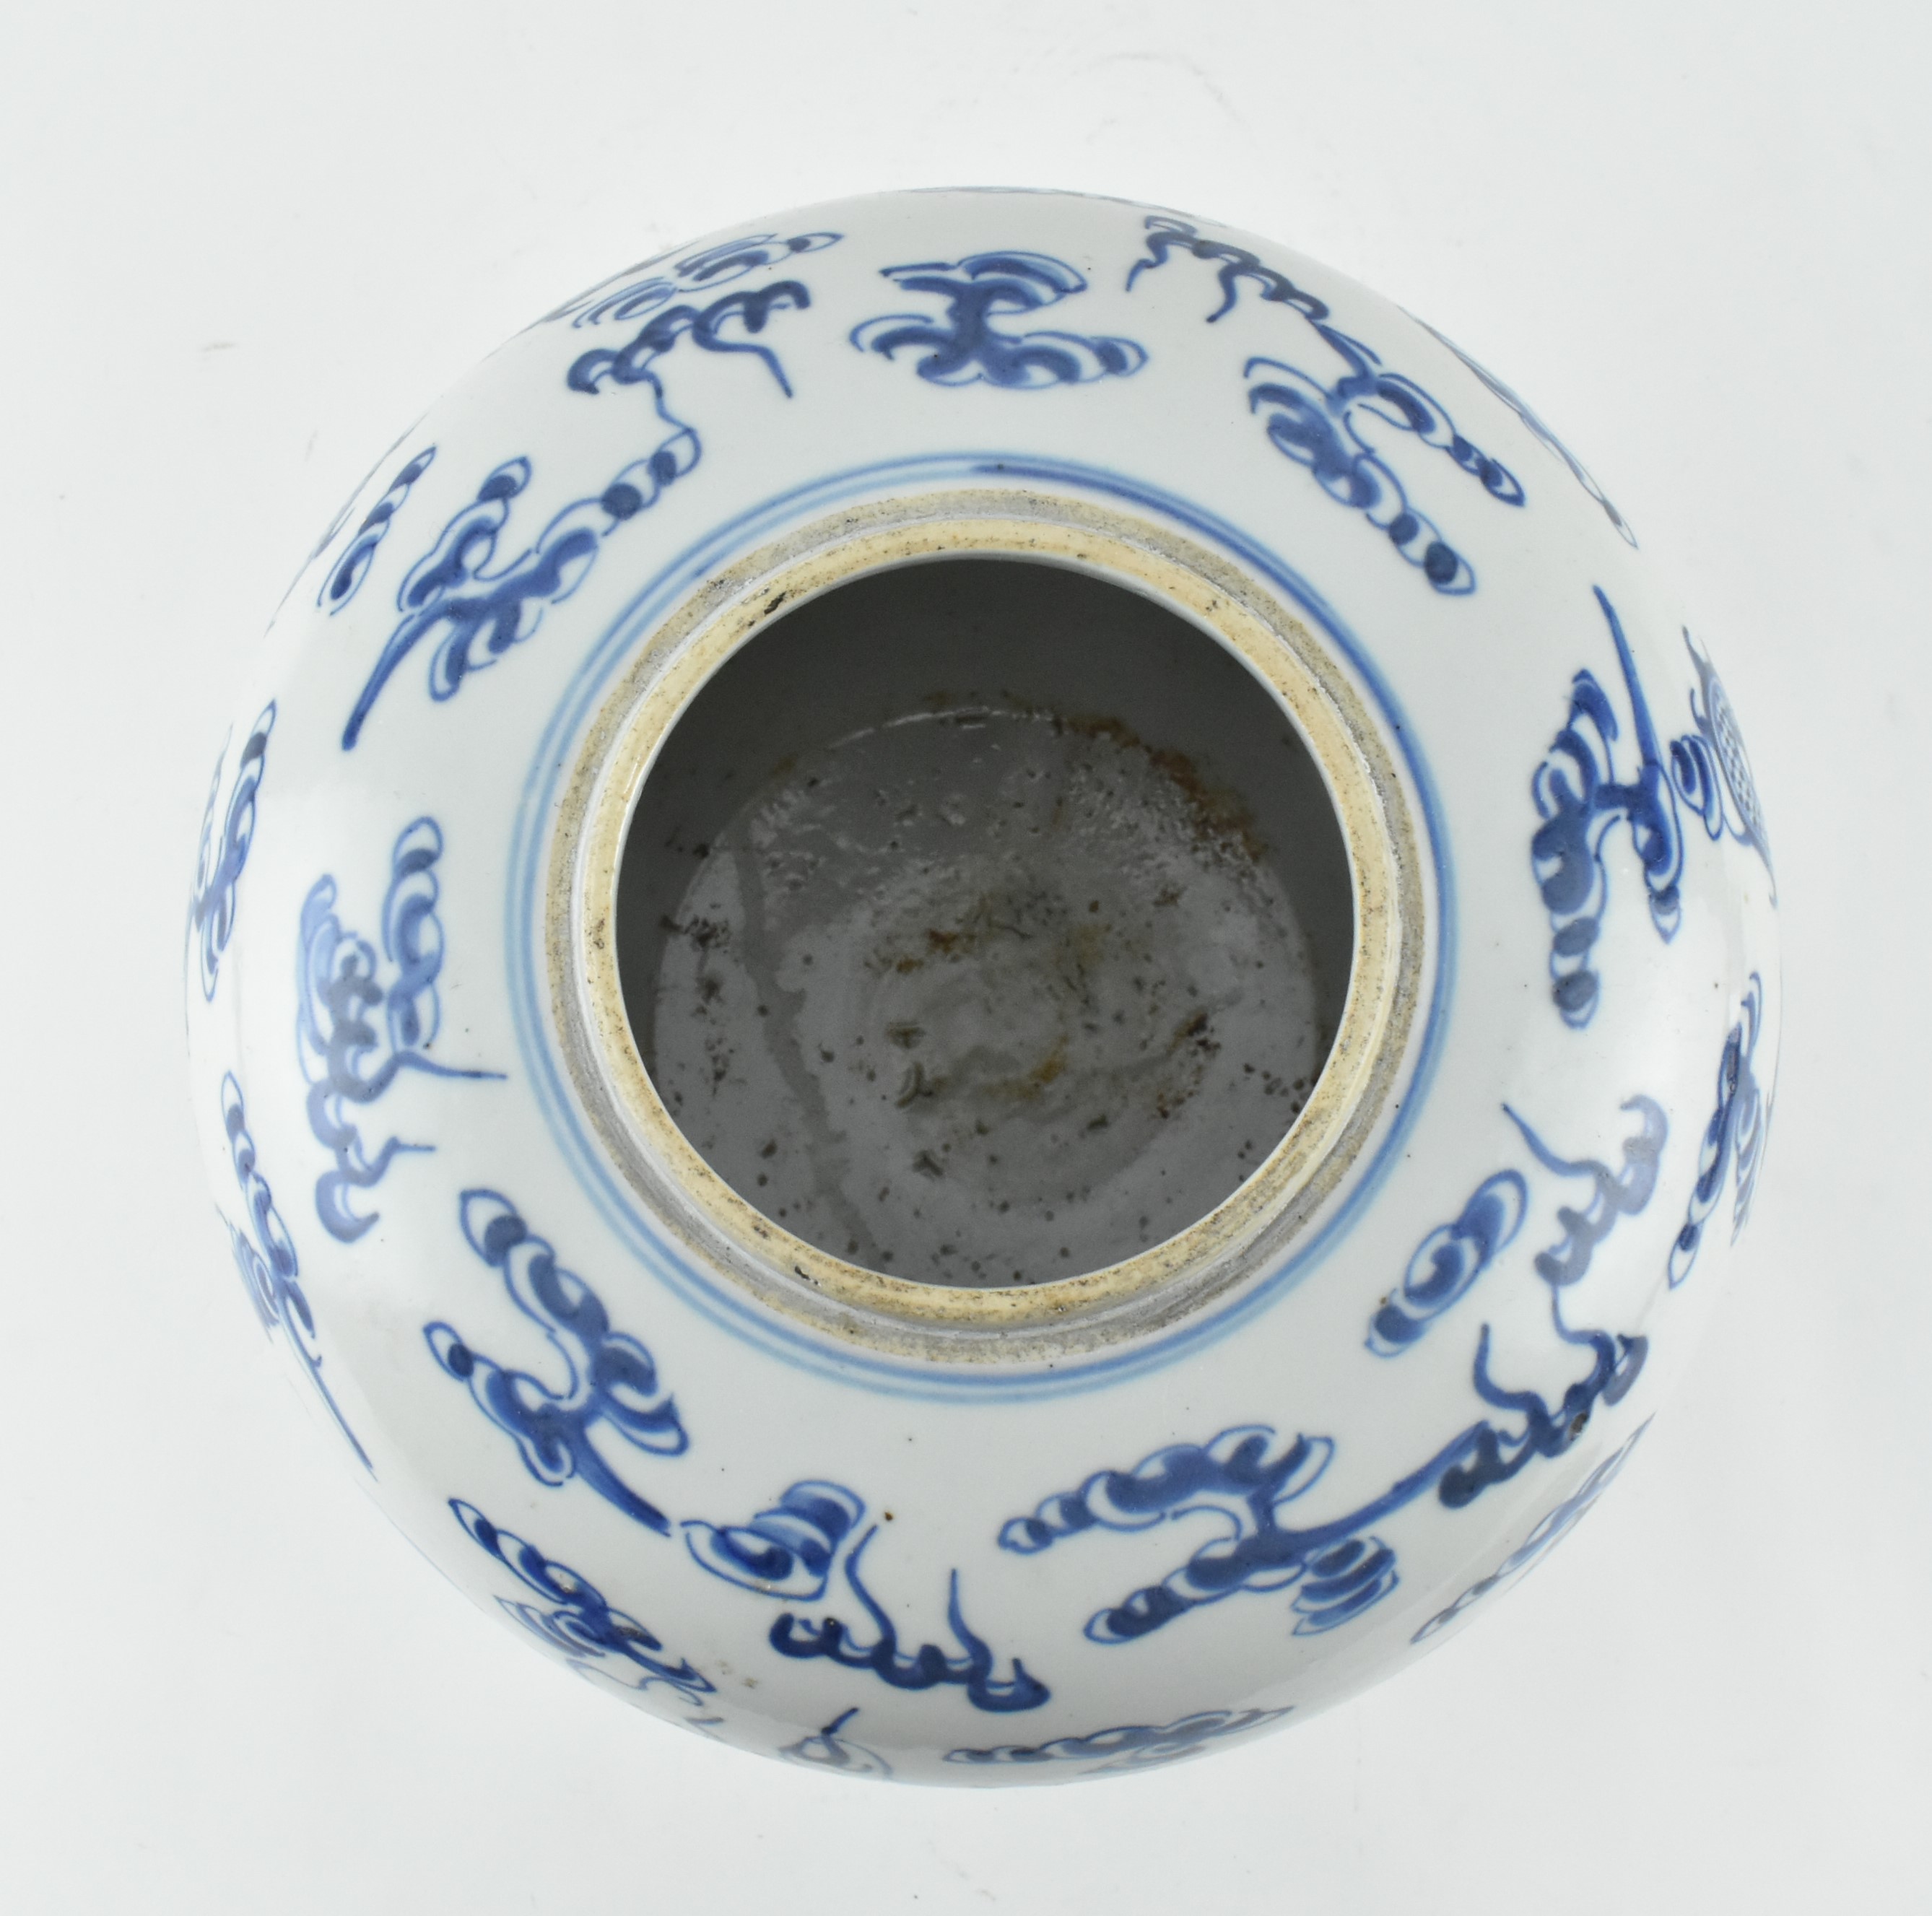 BLUE AND WHITE TWIN DRAGON WITH PEARL JAR 清末 双龙戏珠罐 - Image 4 of 6